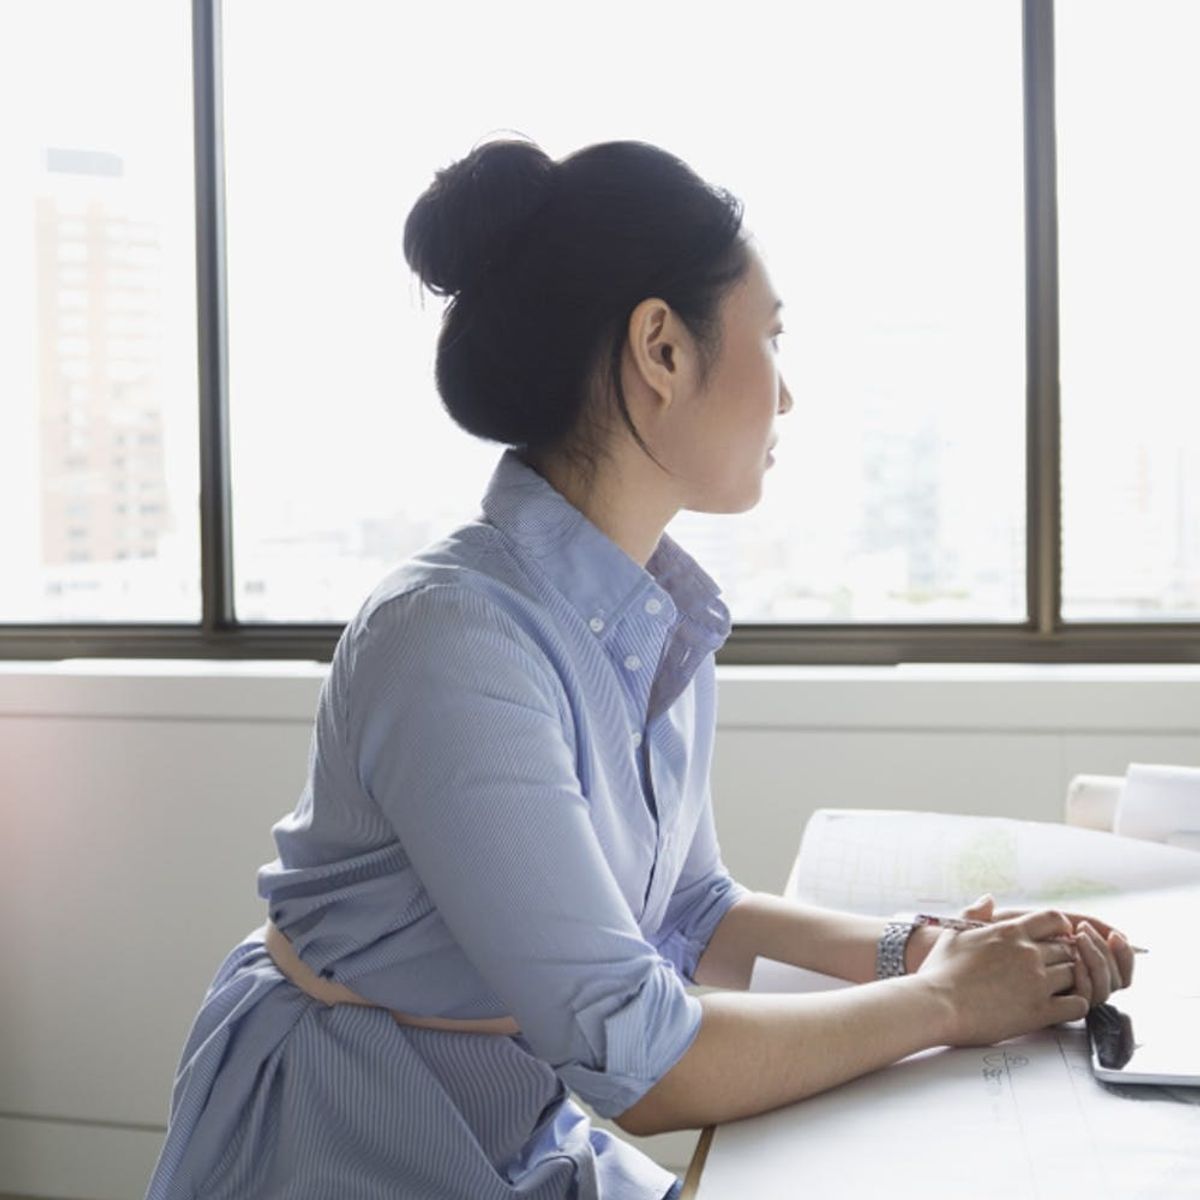 Why Women Are Becoming Increasingly Dissatisfied With Their Workplace Over Time